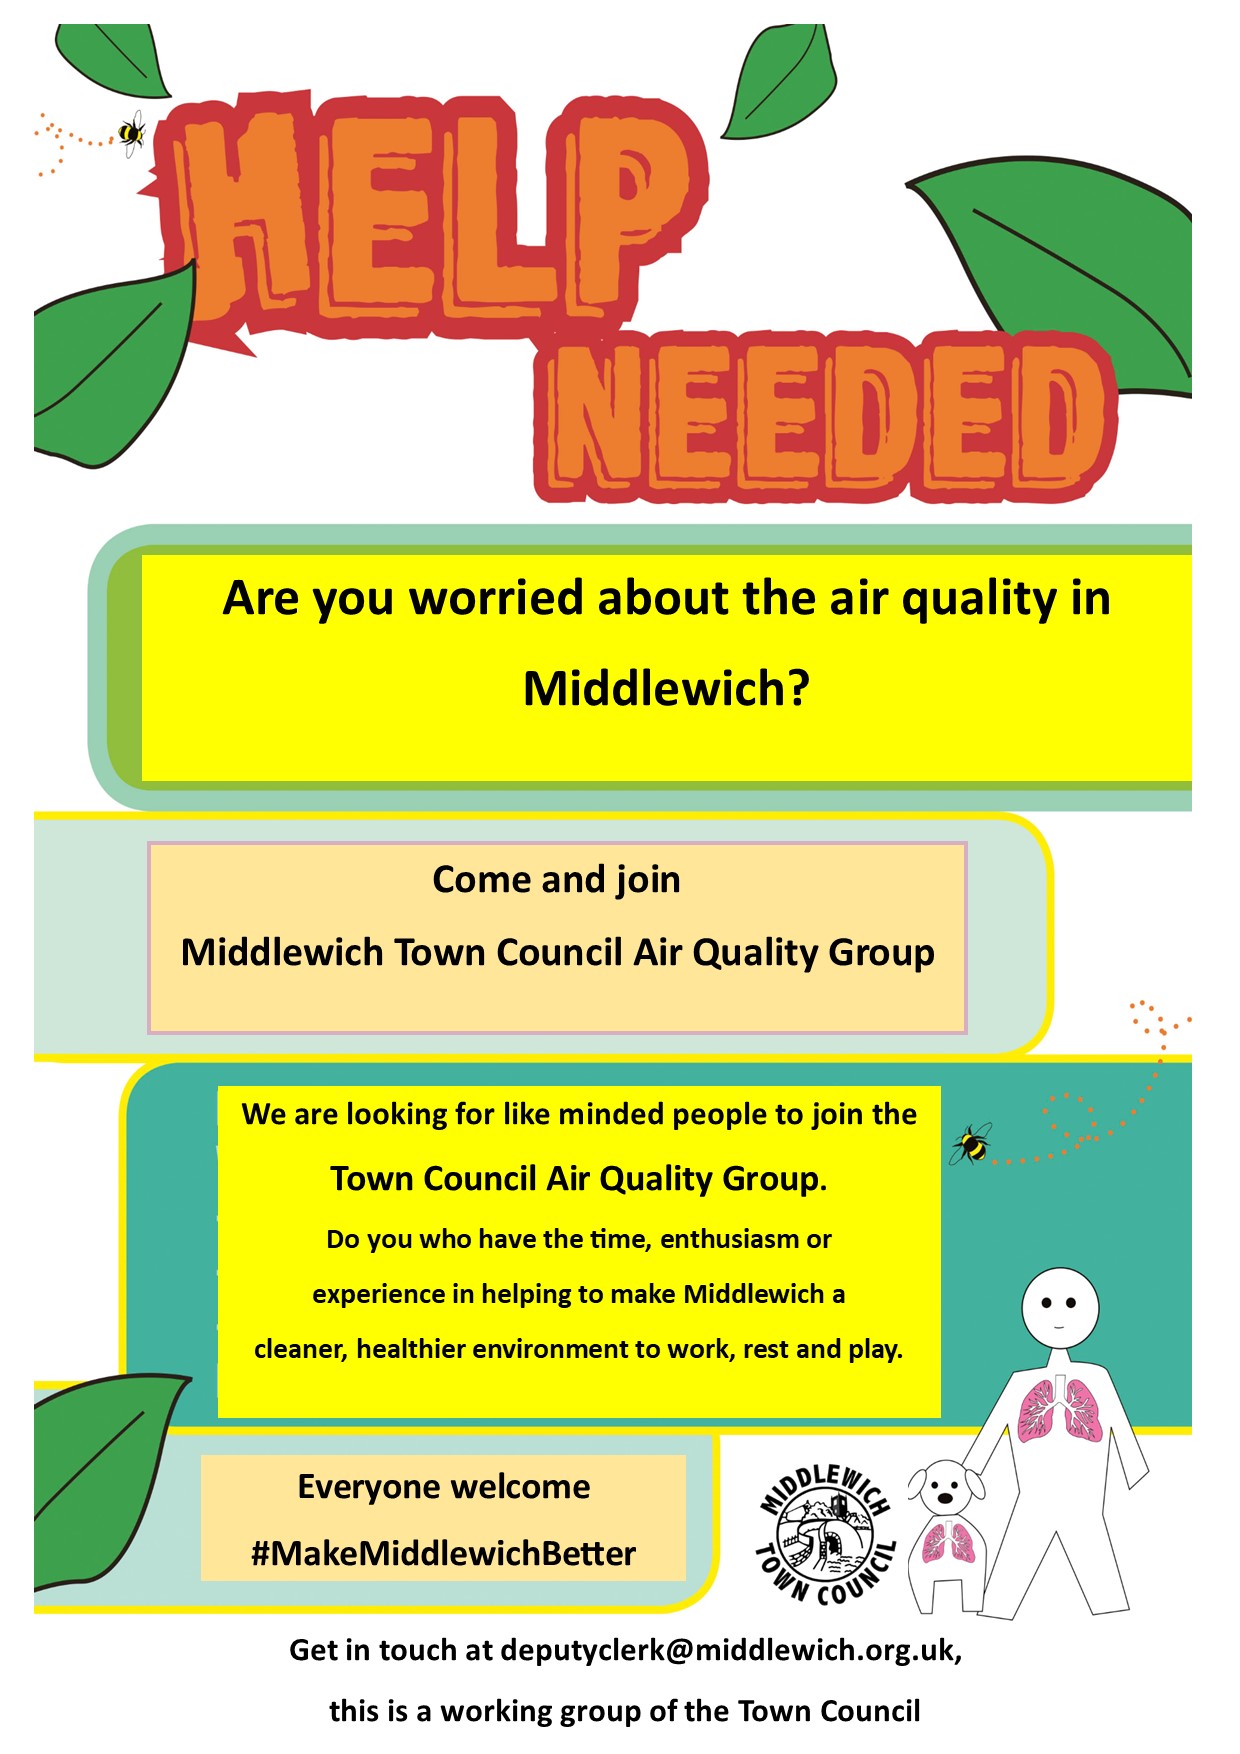 Middlewich Town Council Air Quality Group